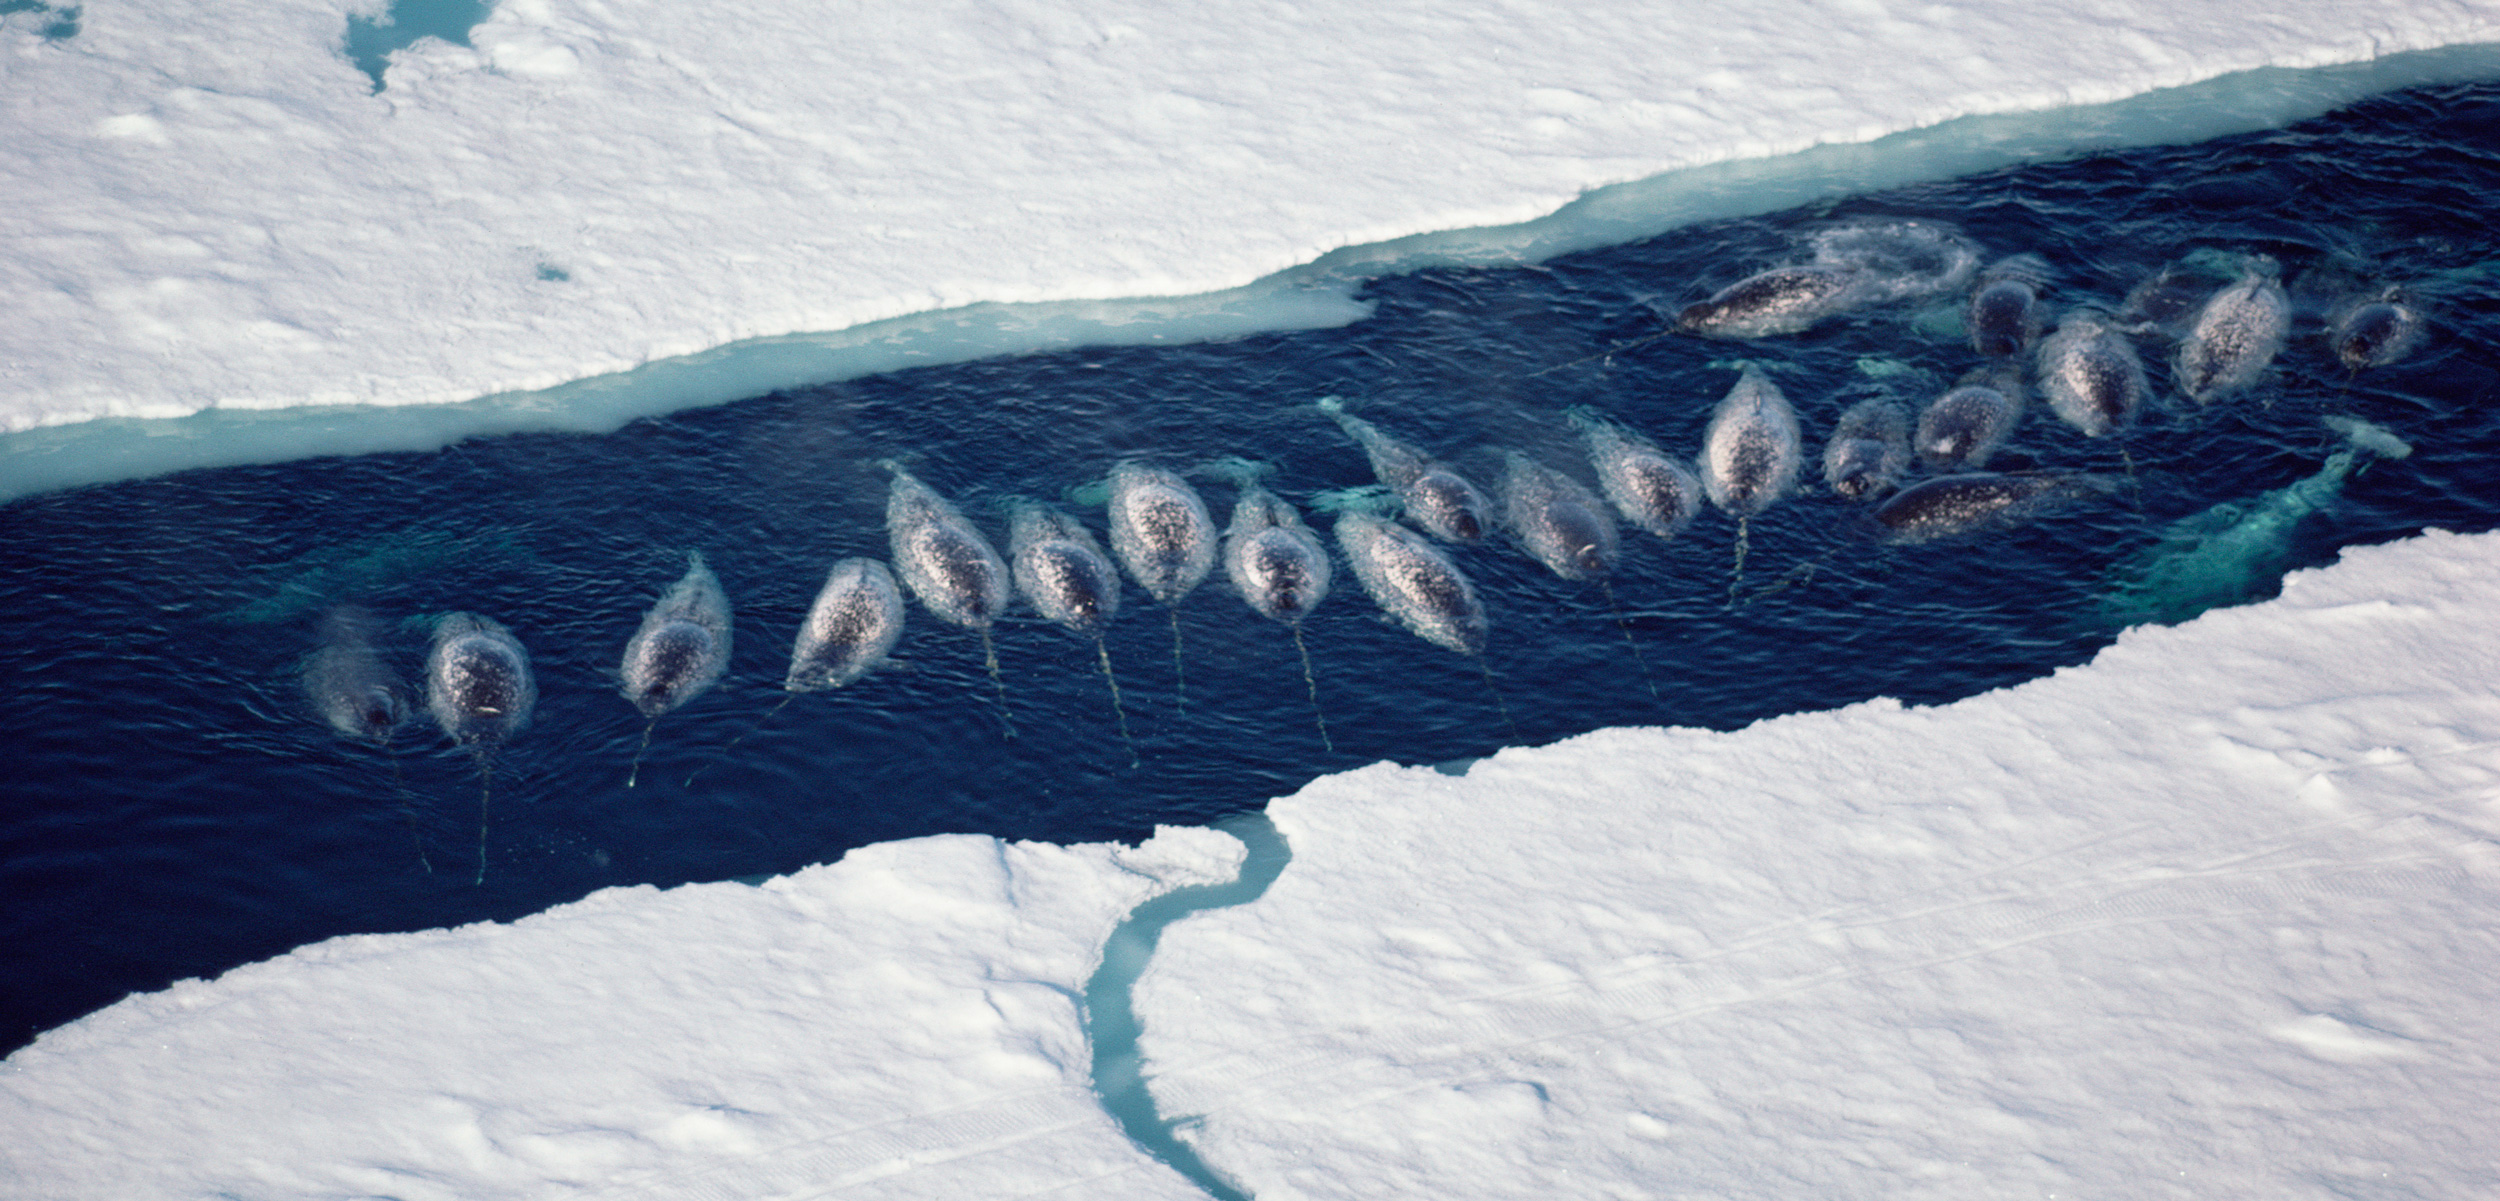 Narwhals travel and hunt along the edges of sea ice. With climate change, narwhals and other ice-dependent animals have to adapt to an evolving Arctic. Photo by Flip Nicklin/Minden Pictures